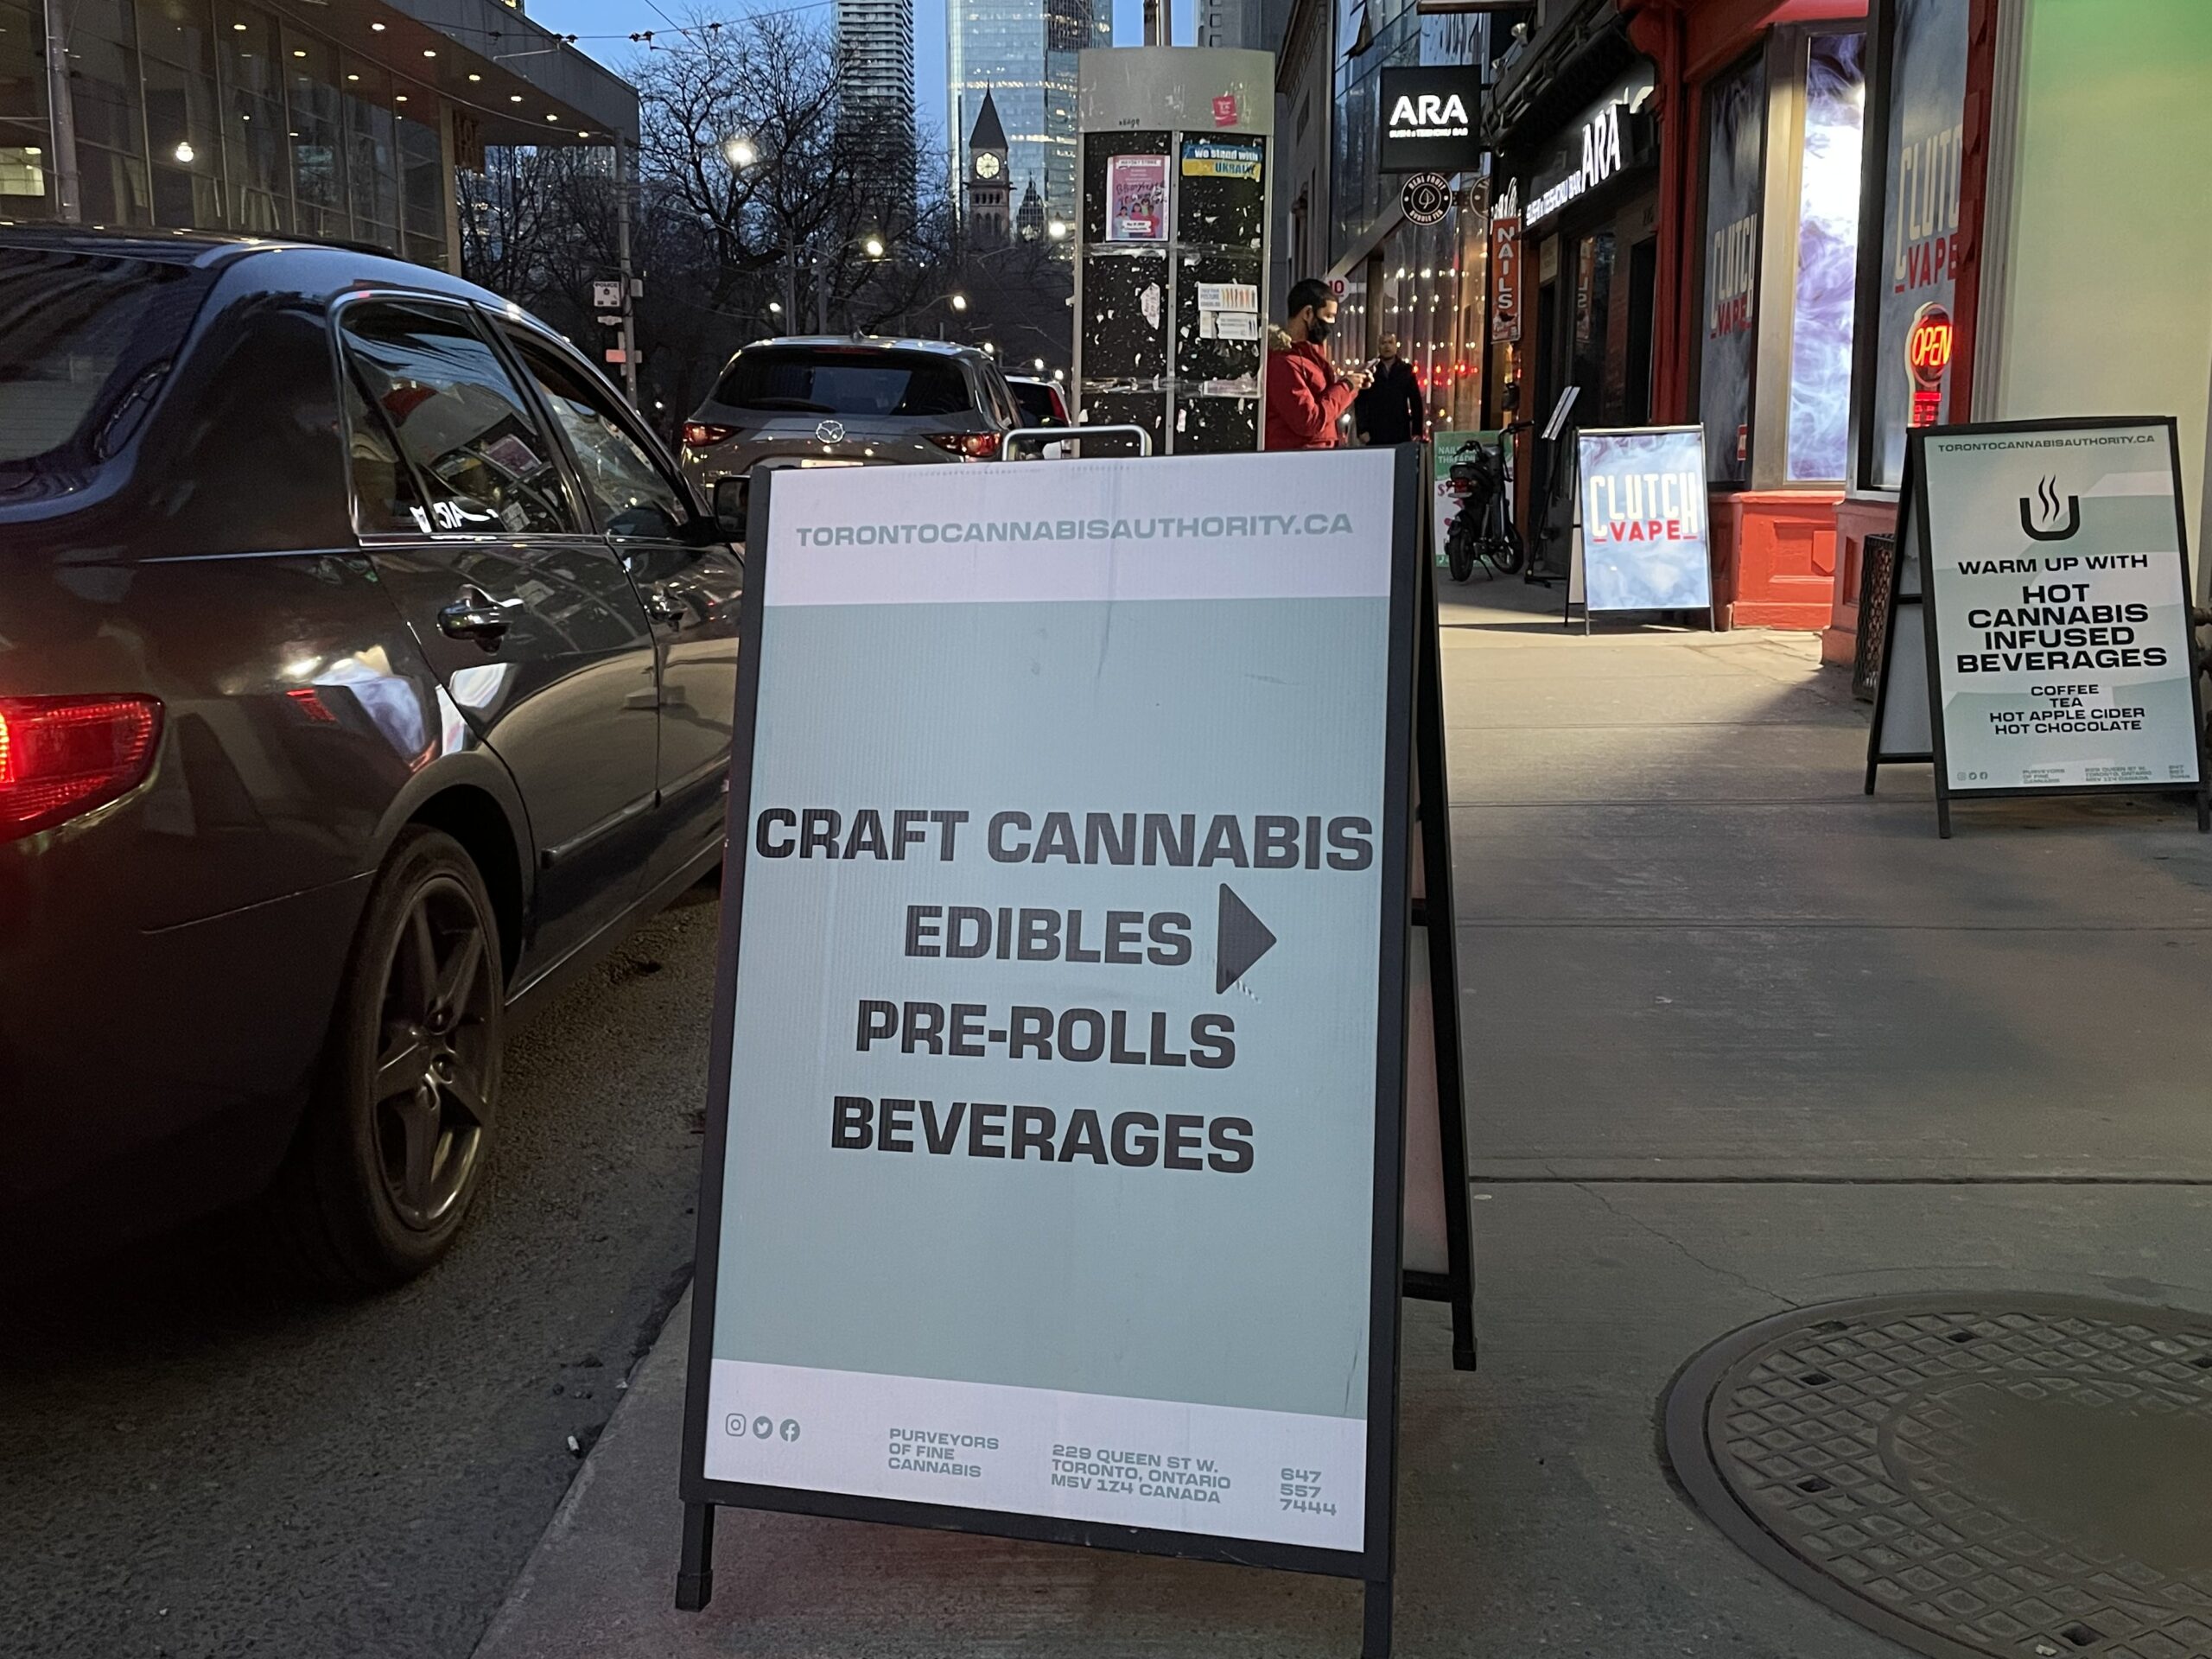 advertisement of different products sold; edibles, pre rolls, beverages.